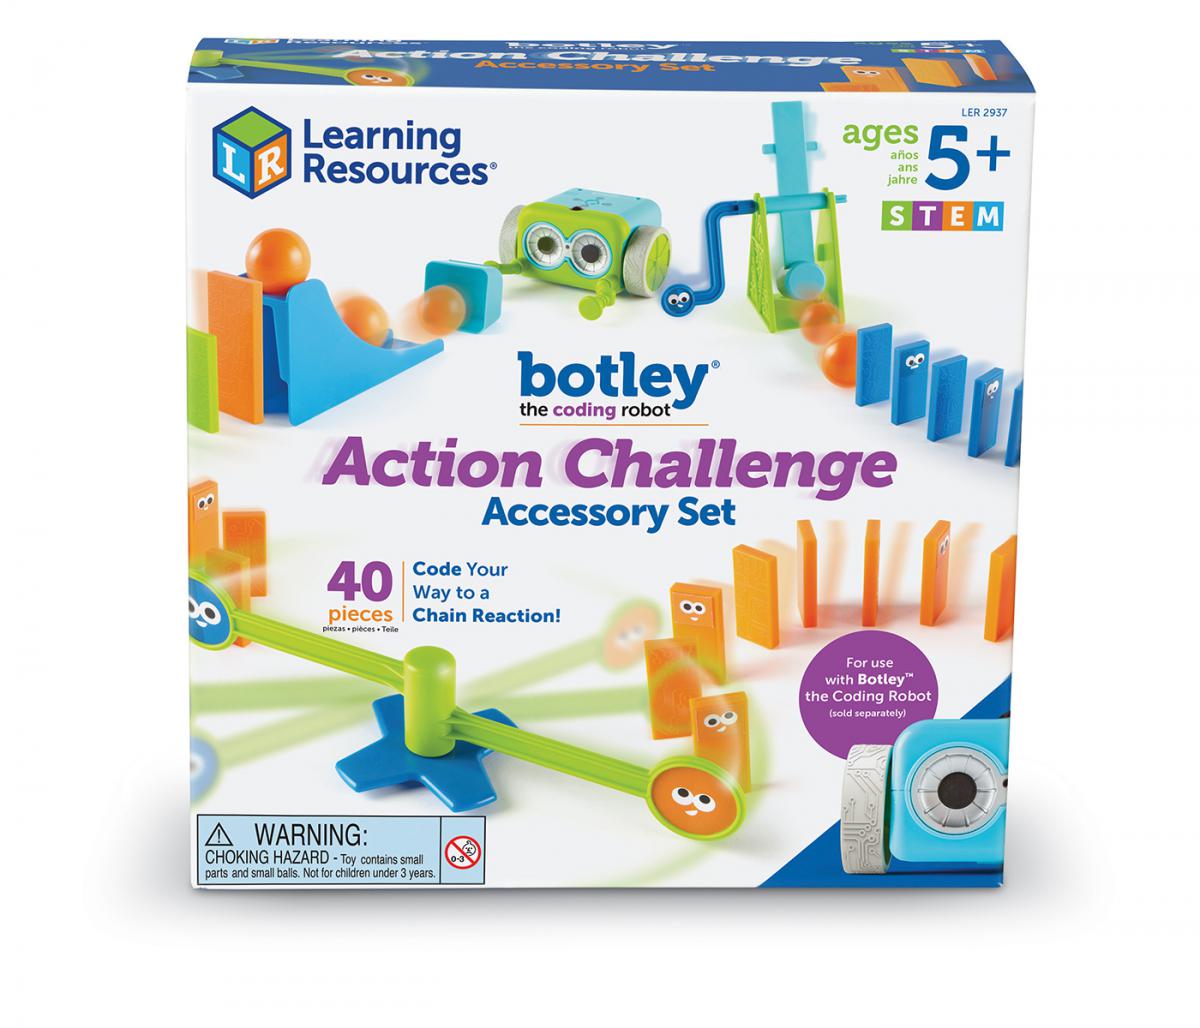  Botley® the Coding Robot Action Challenge Accessory Set 